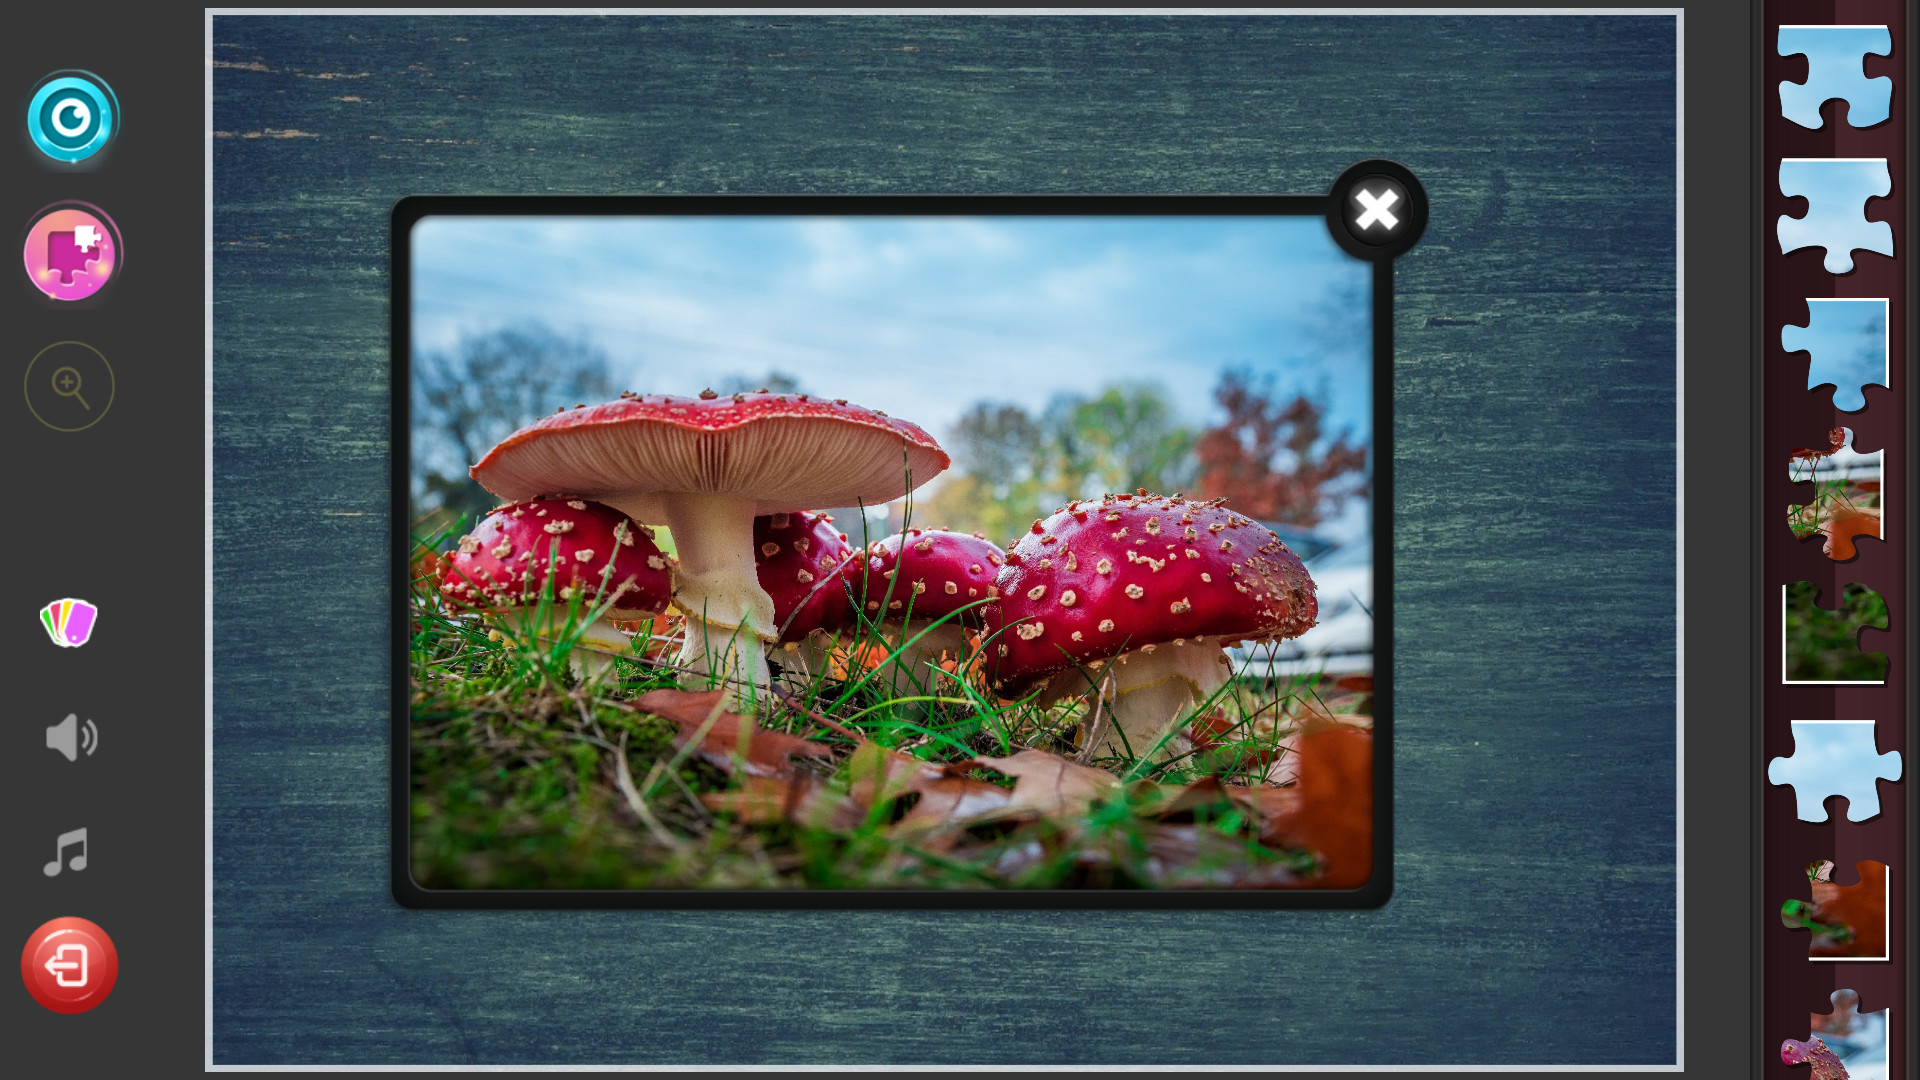 Classic Jigsaw Puzzles - Forest Jigsaw Puzzles Featured Screenshot #1